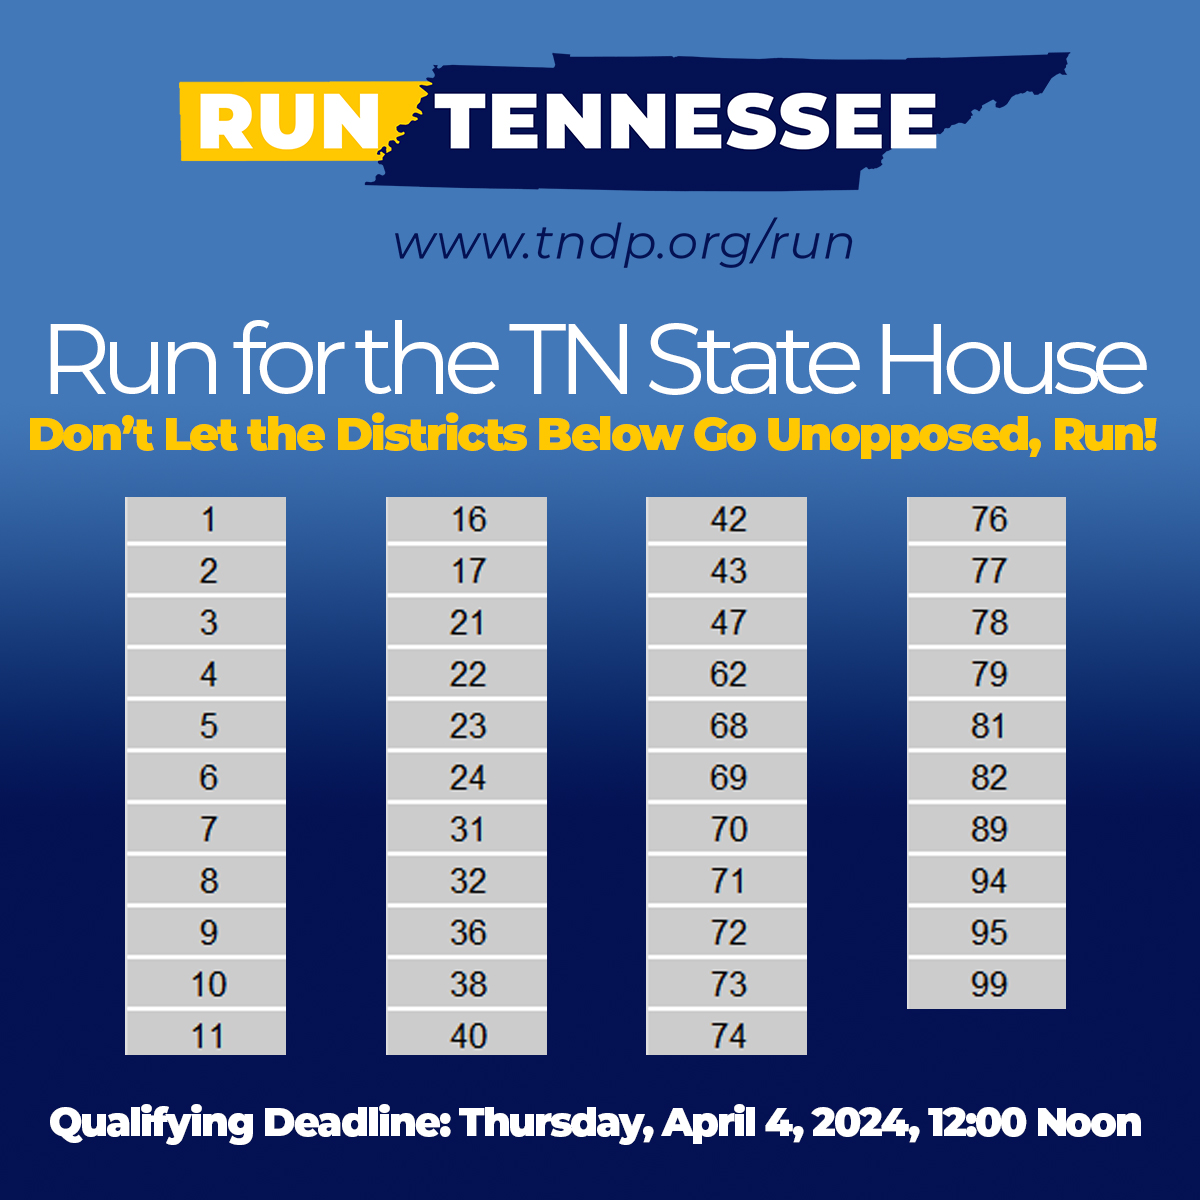 We need Democrats stepping up to run for office in every district in 2024. We CAN'T allow Republicans to run unopposed. Want to run for State House? We want to help. Visit tndp.org/run and complete our candidate interest form or email recruit@tndp.org.